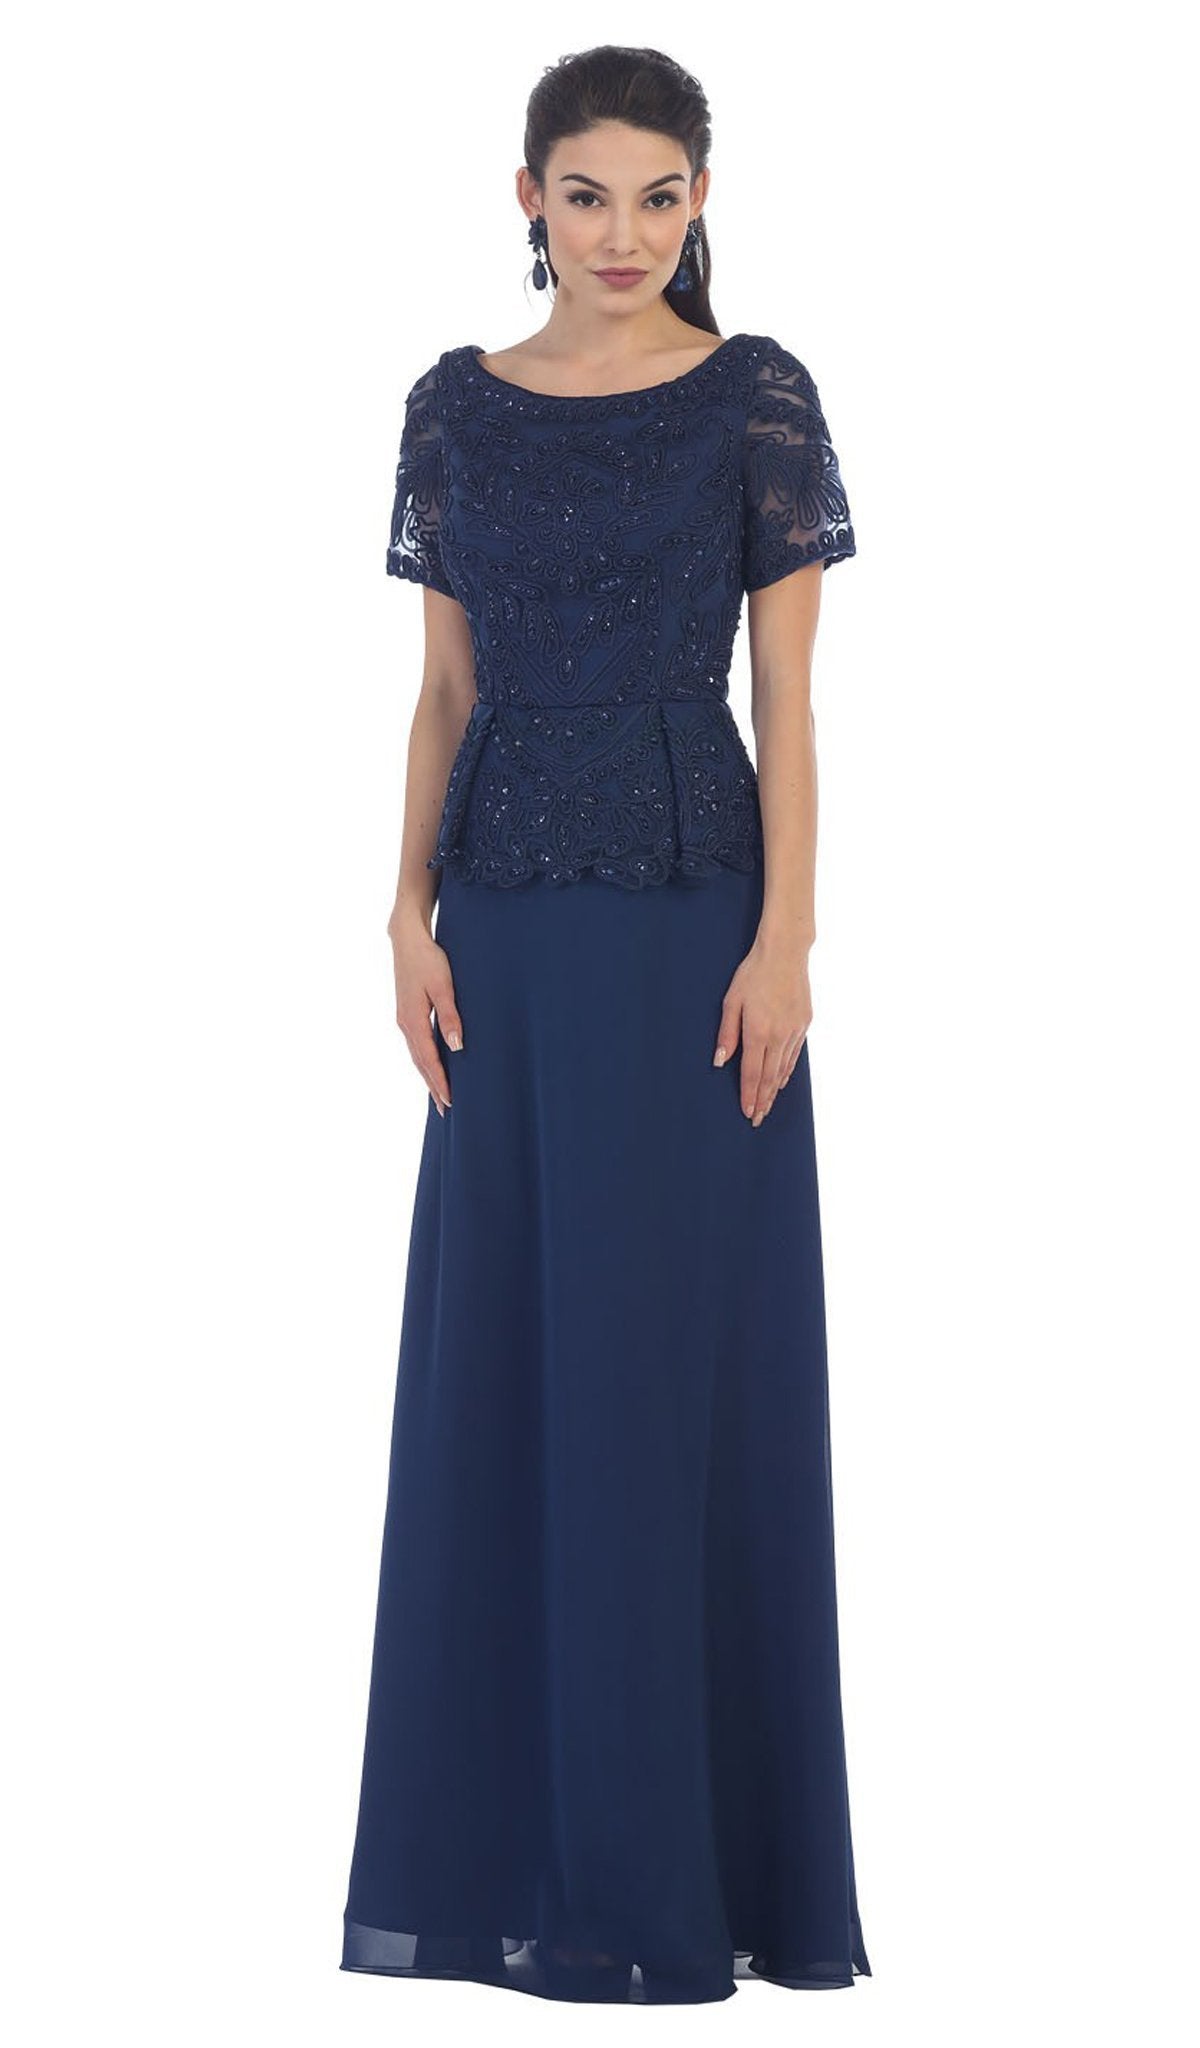 May Queen - MQ-1427 Short Sleeve Embroidered Bateau Neck A-line Evening Dress Special Occasion Dress M / Navy